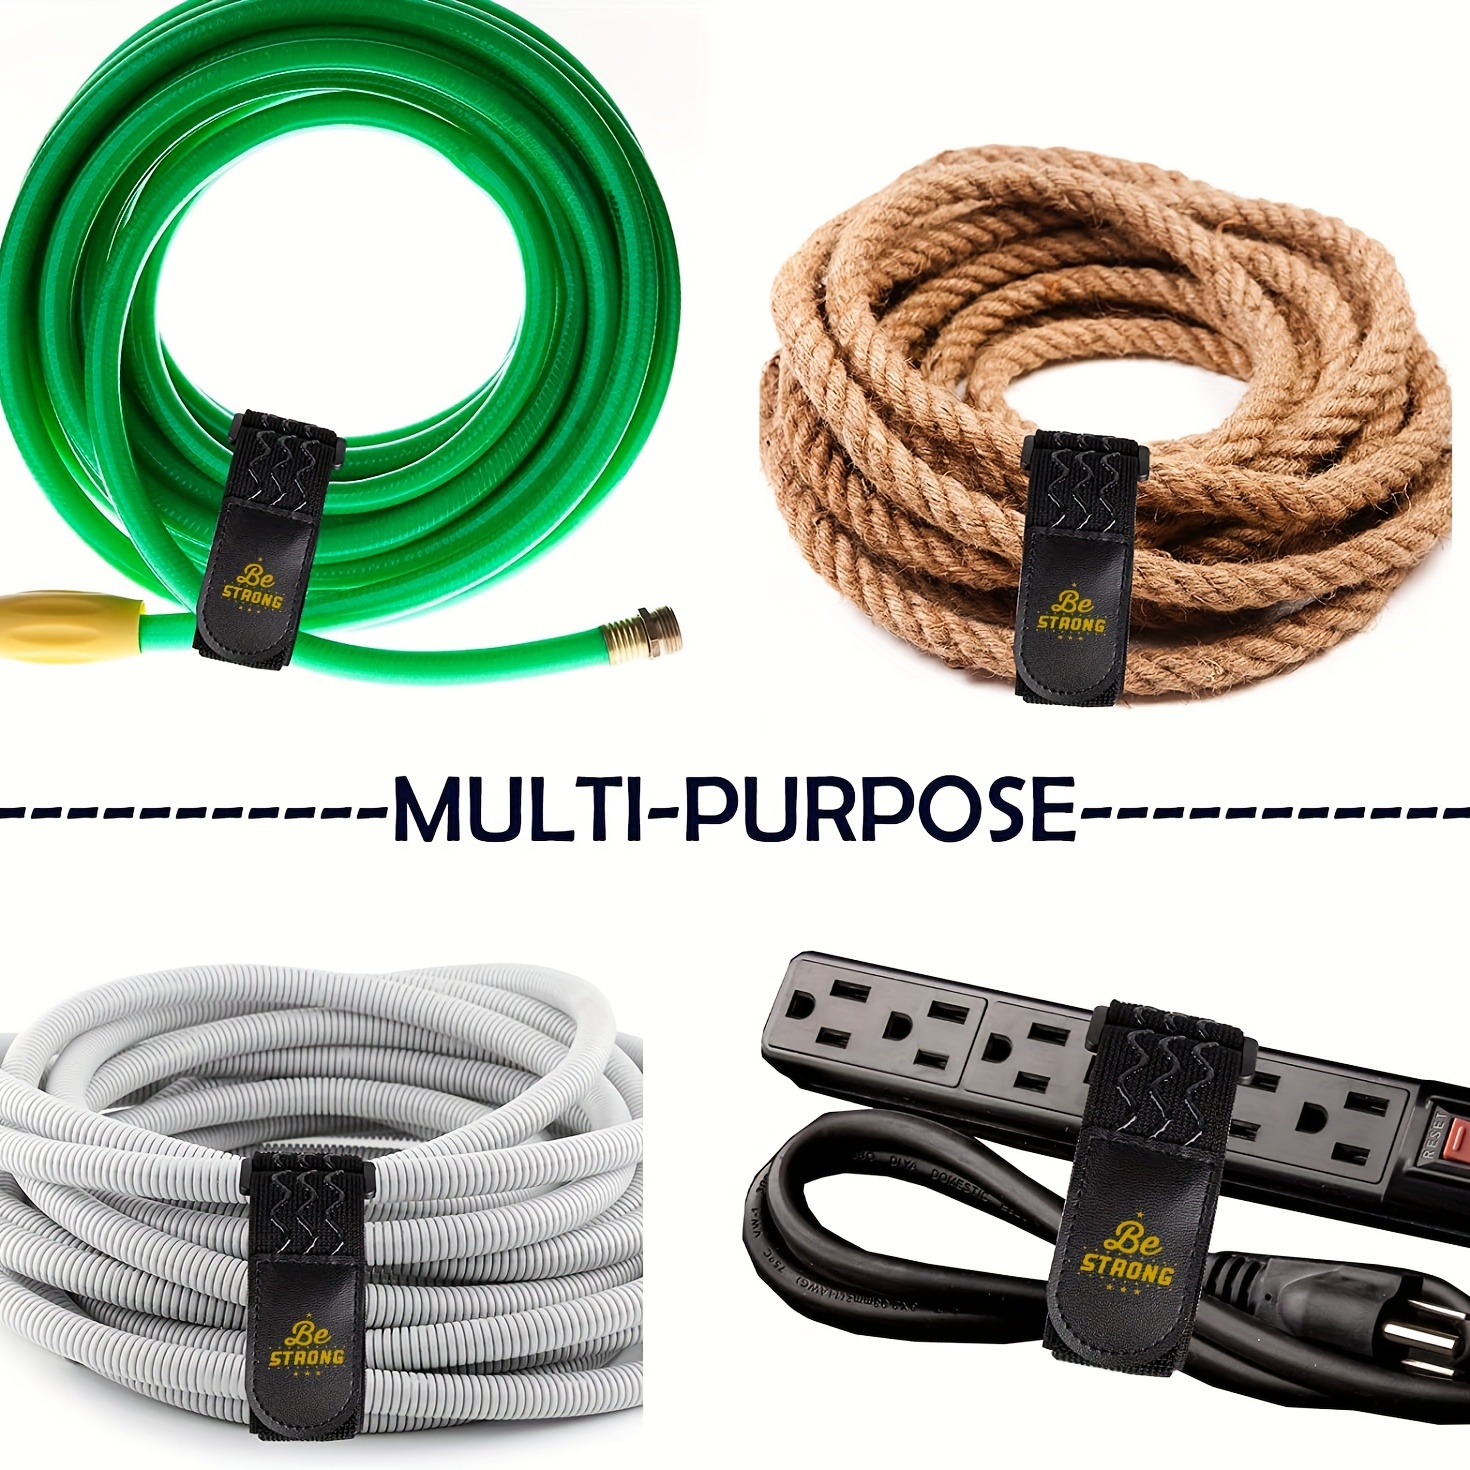 All Purpose Elastic Cinch Strap - 12 x 1 Inch - 5 Pack at Cables N More